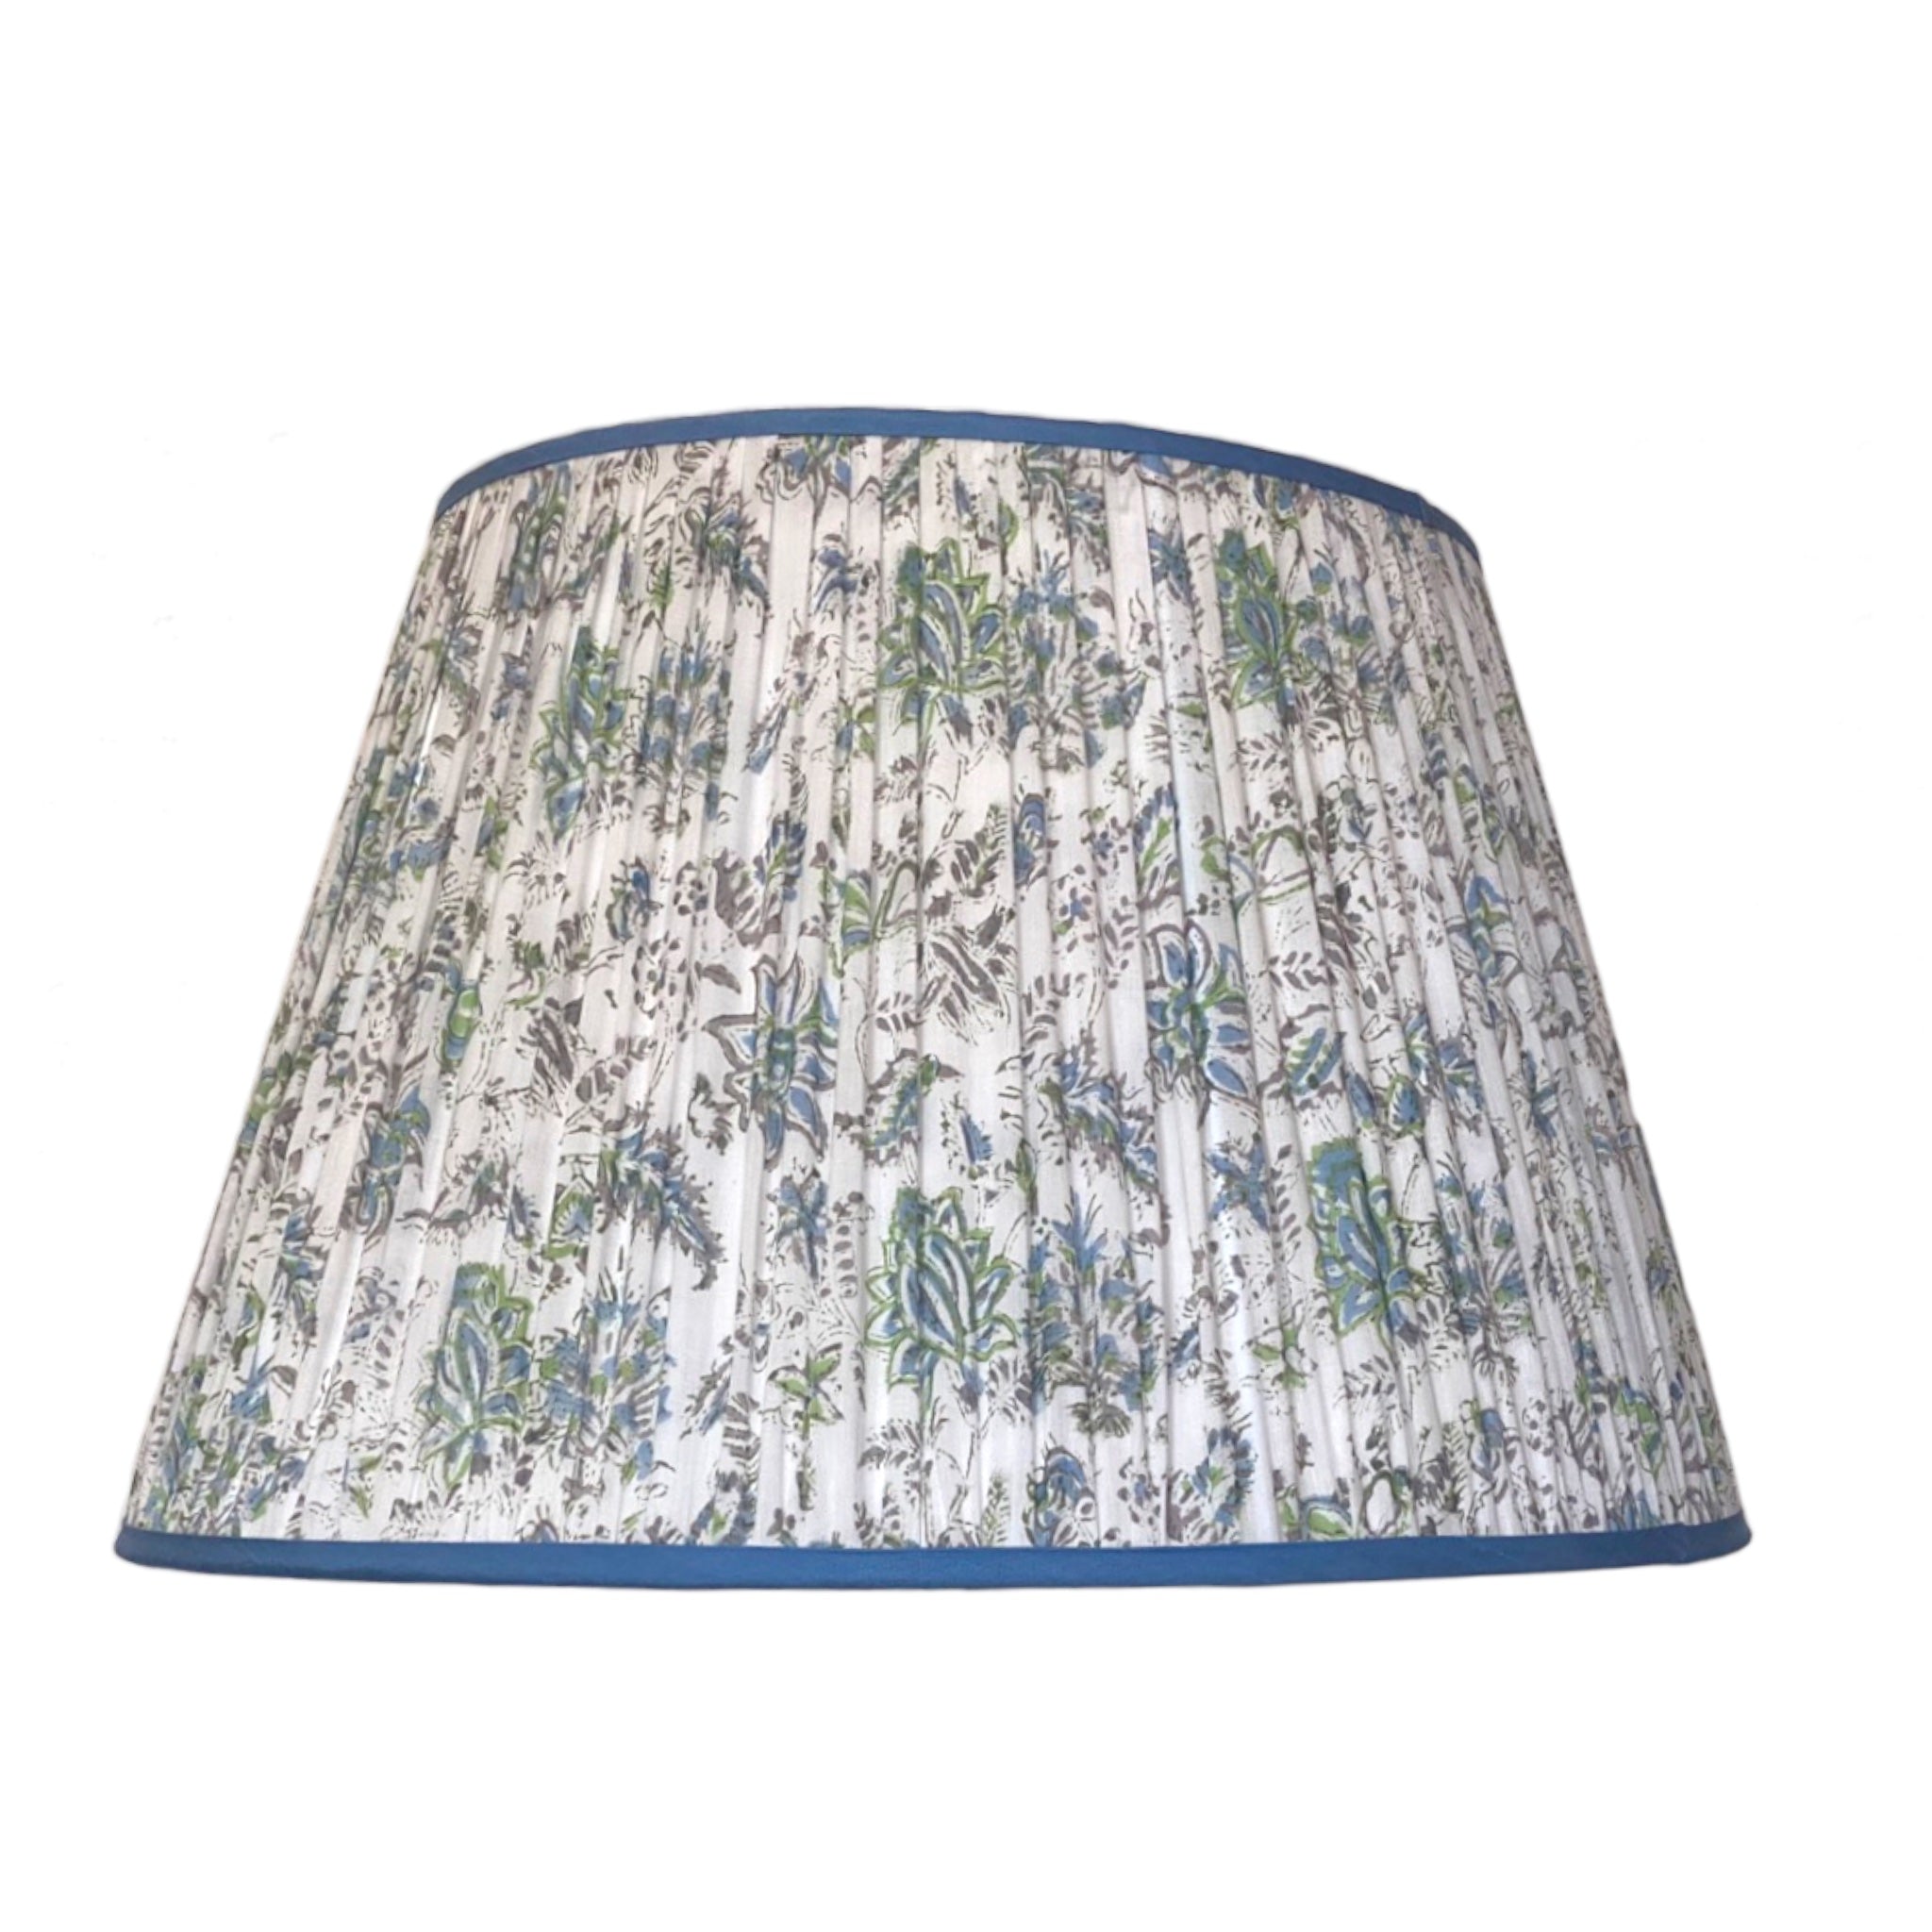 Forget-me-not Cotton Lampshade